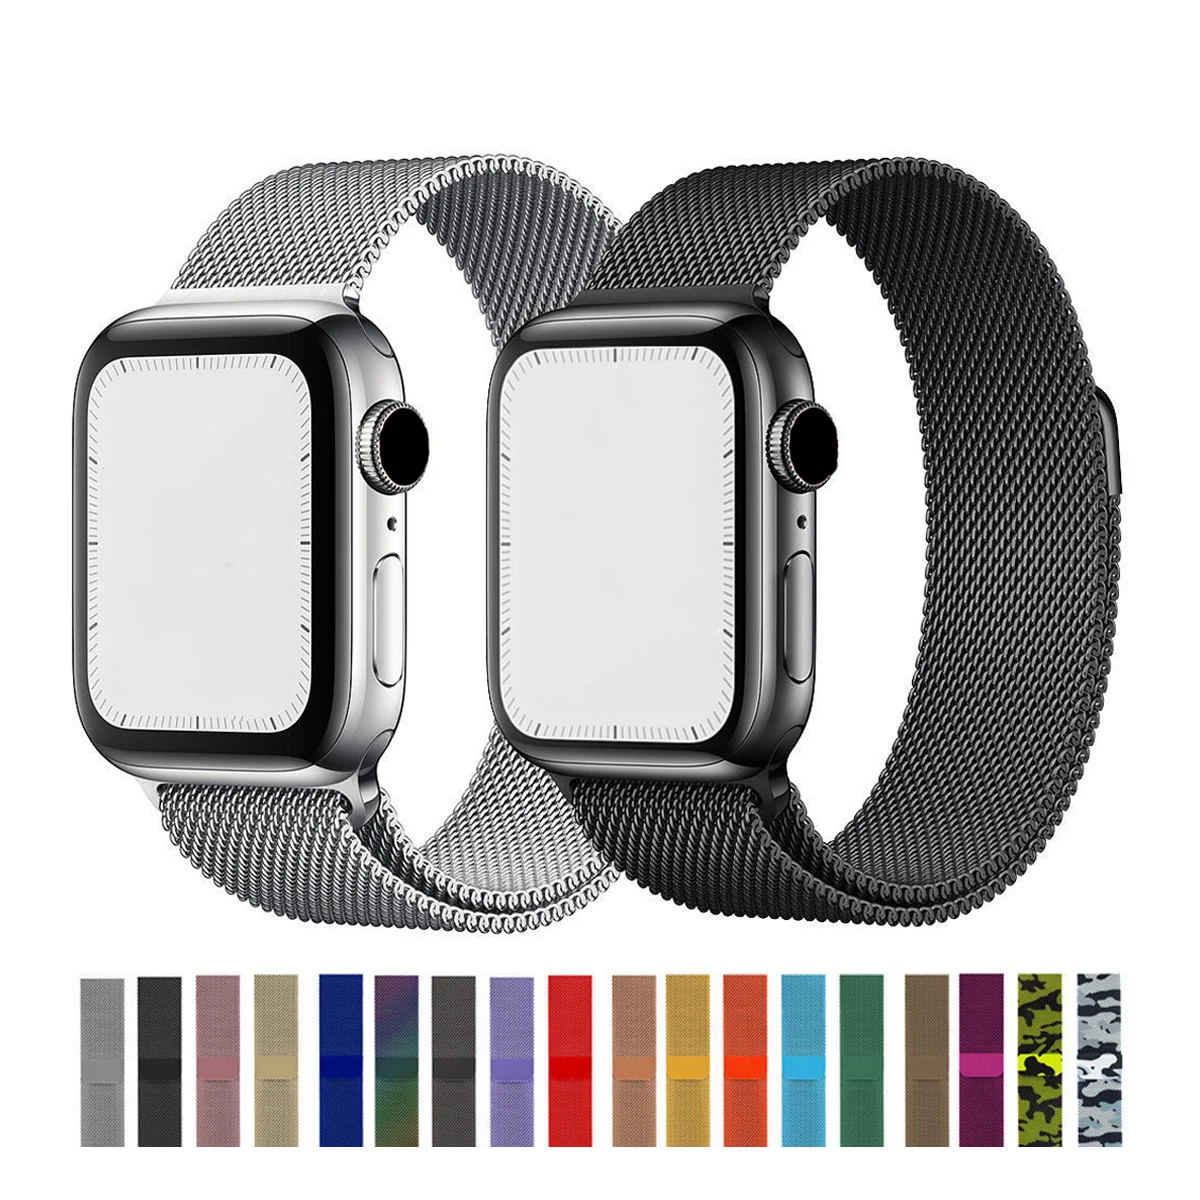 

Milanese Loop 38mm 42mm Band For Apple Watch Band Metal Watch Strap Steel Luxury Watch Band For Iwatch Series 6 SE 5 4 3 2 1, Optional